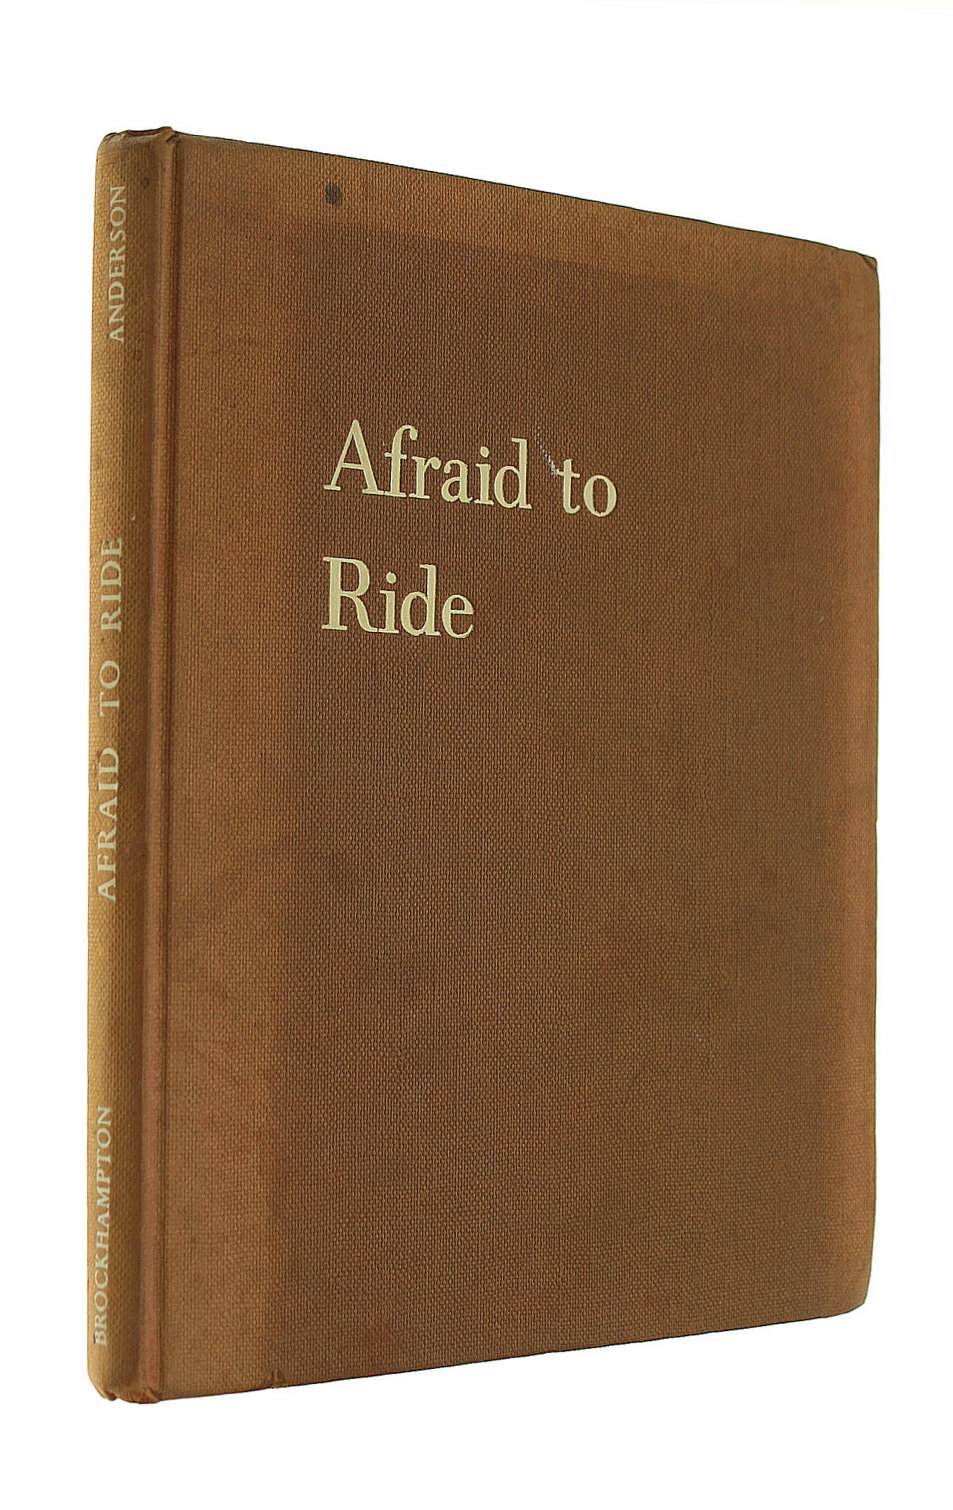 CW ANDERSON - Afraid to Ride